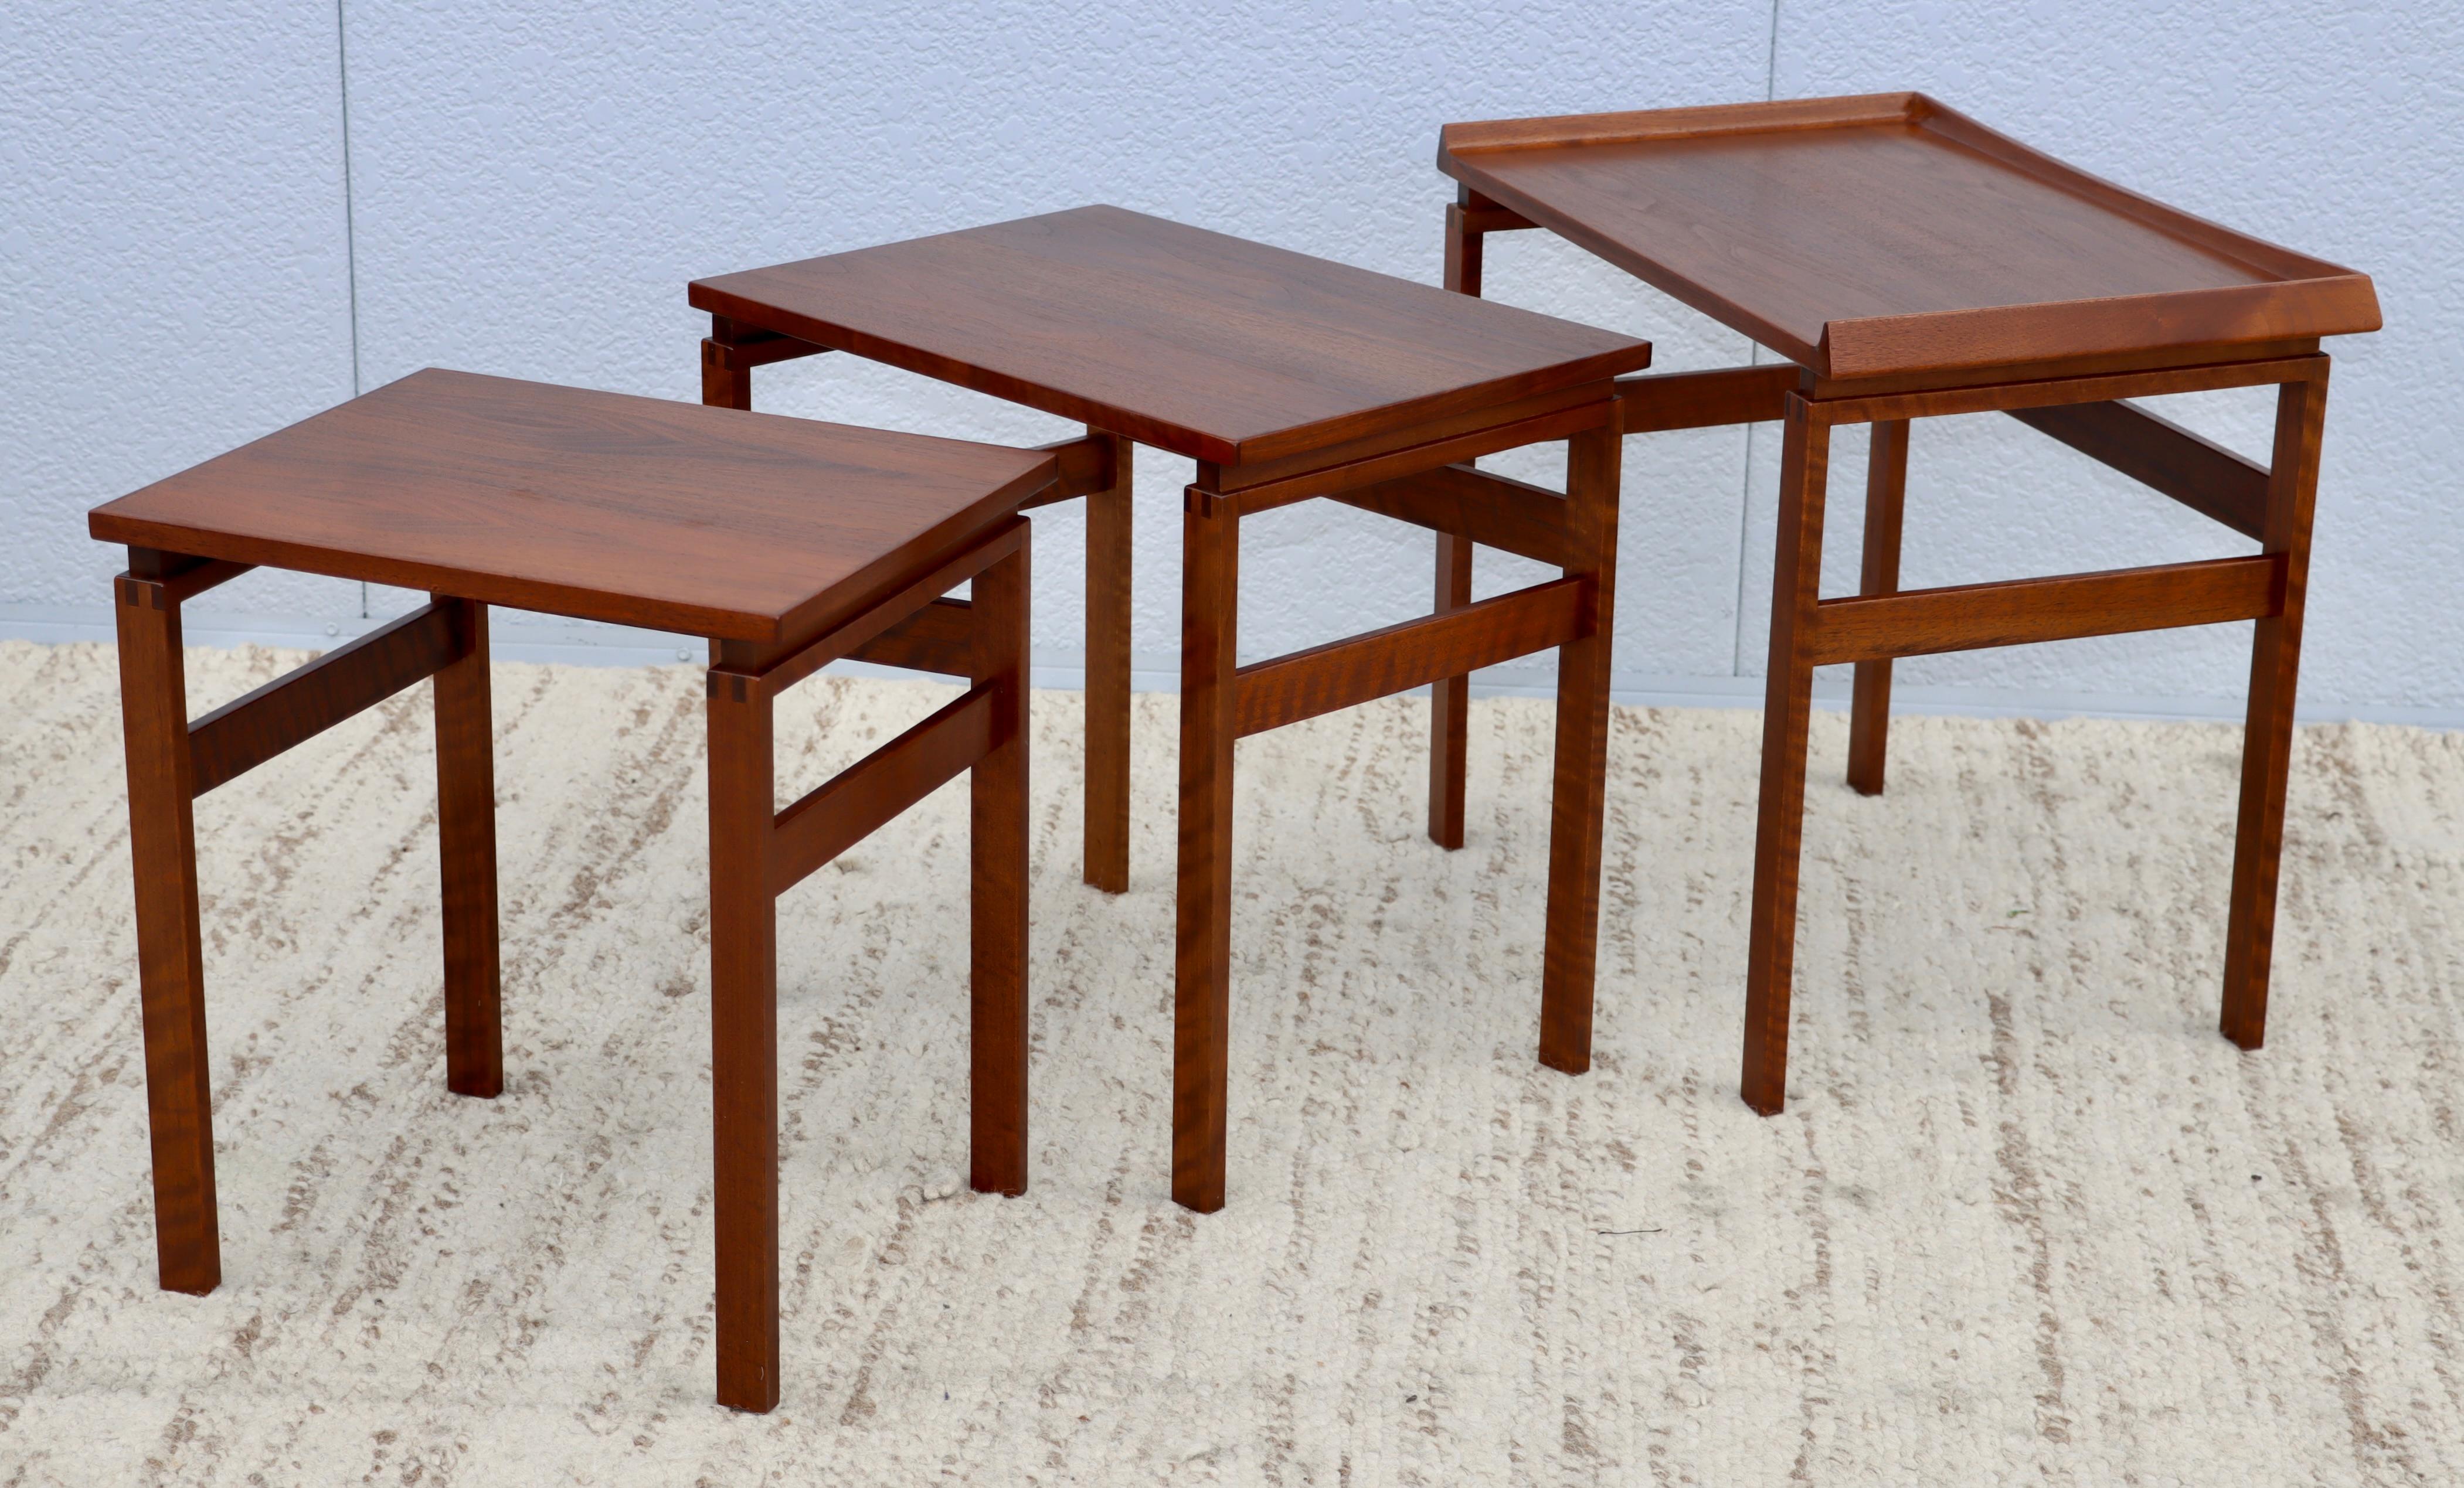 1960s Mid-Century Modern teak and walnut nesting table by Moreddi, lightly restored with minor wear and patina due to age and use.